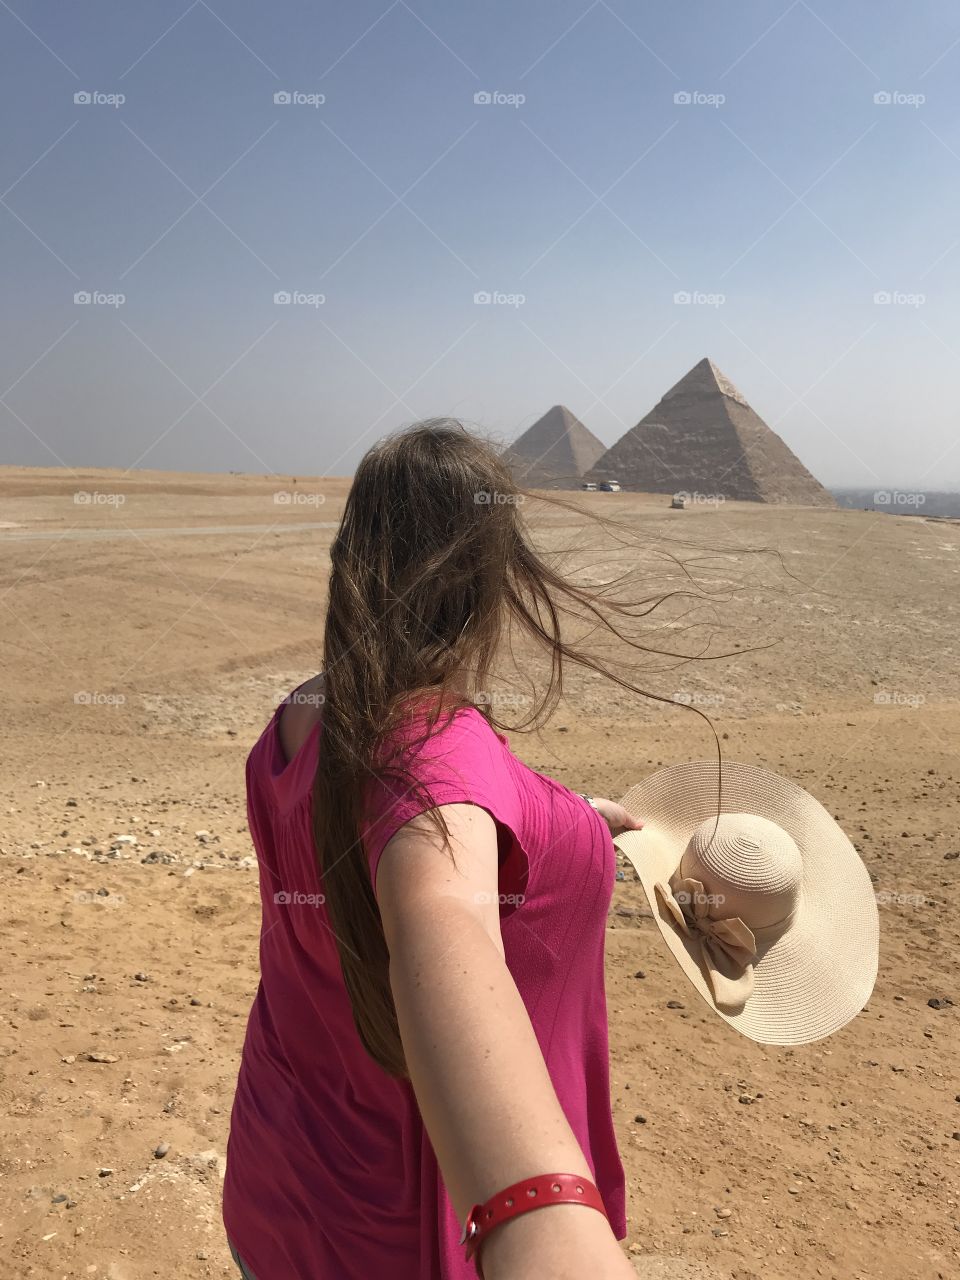 Come take a walk with me to the mysterious pyramids this beautiful morning with the wind in your hear.